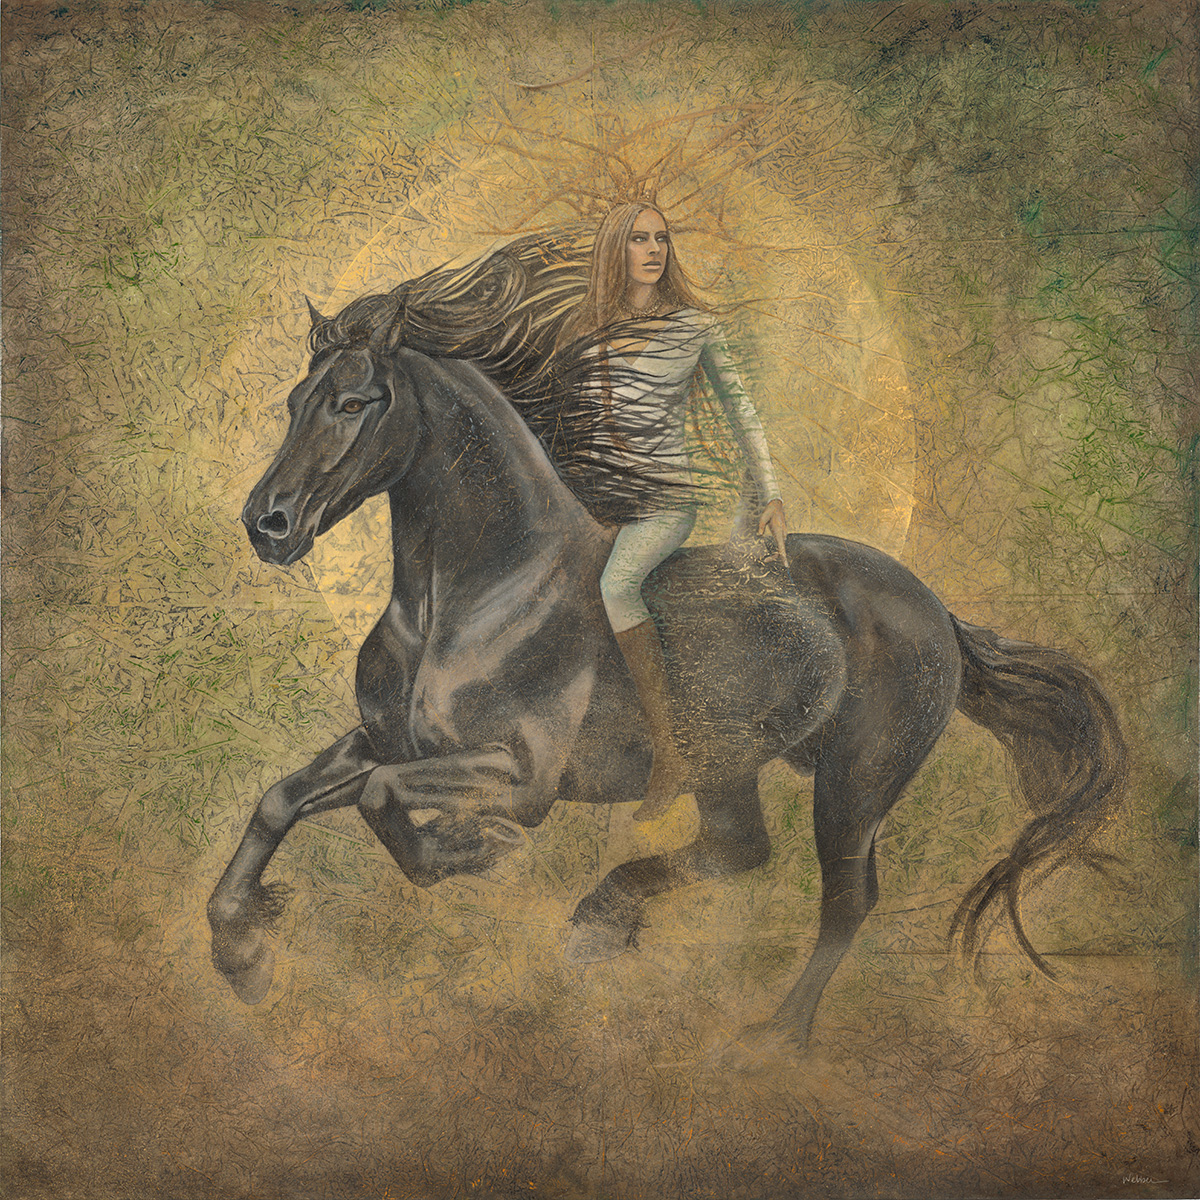 icine-horse_Kimberly-Webber_Contemporary-Symbolist-Paintings_Magical-Realism_Transcendental-Art_Archetypal-Visionary-Artist_Taos-New-Mexico